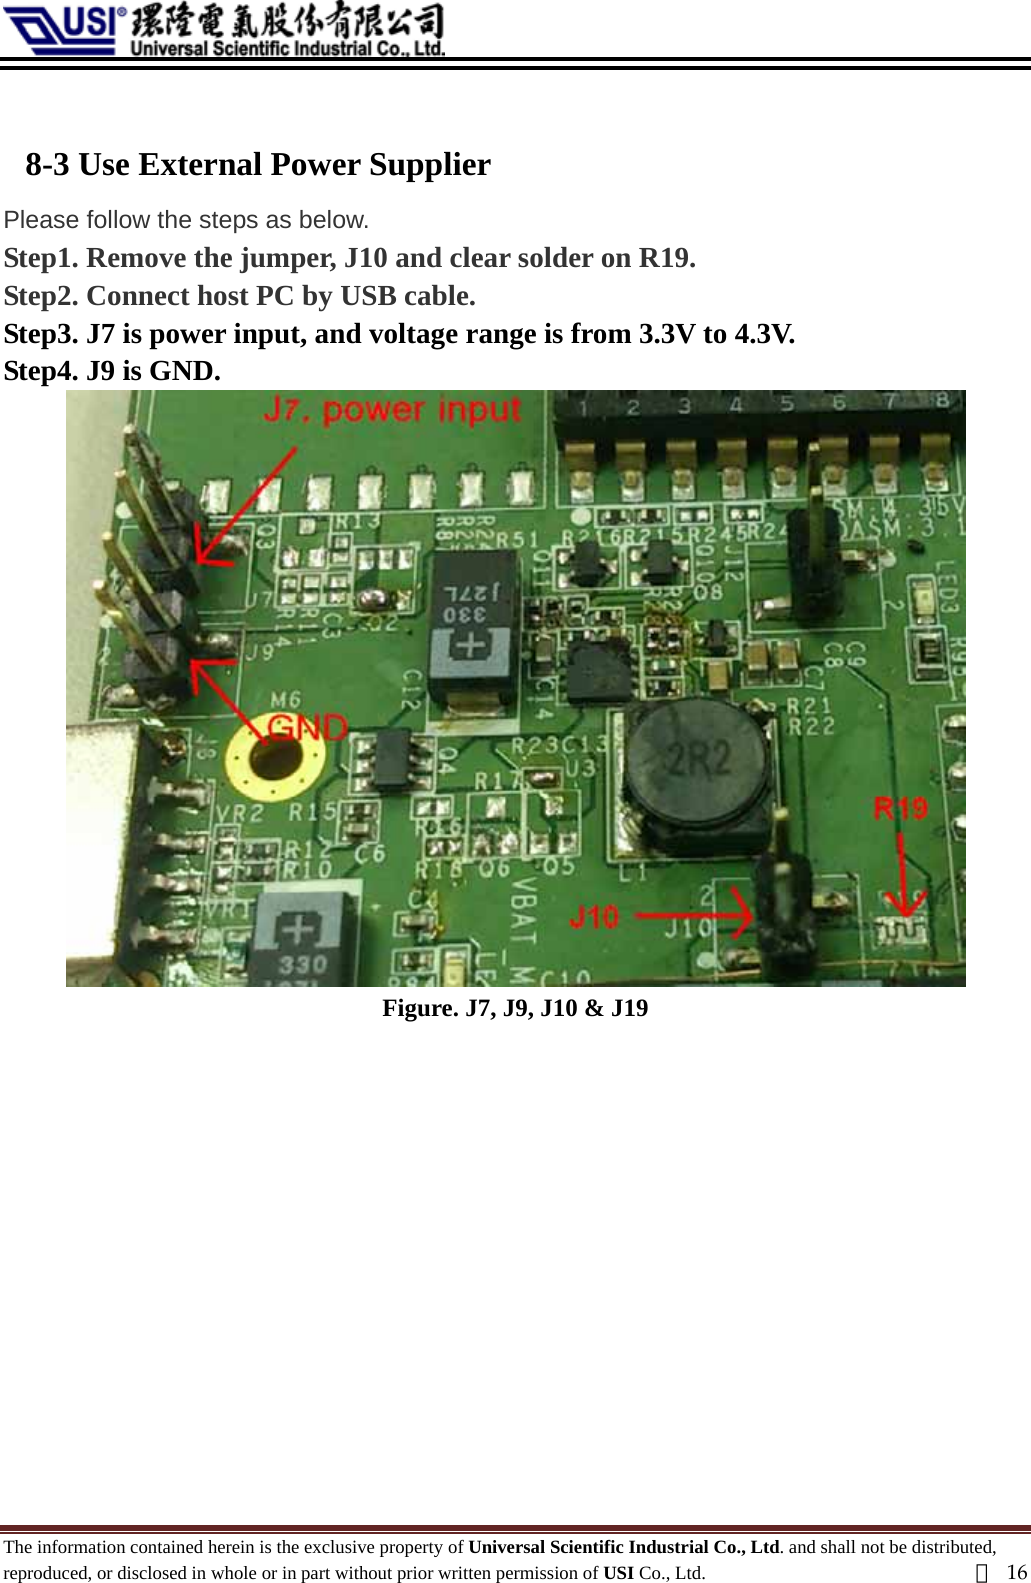   8-3 Use External Power Supplier   Please follow the steps as below. Step1. Remove the jumper, J10 and clear solder on R19. Step2. Connect host PC by USB cable. Step3. J7 is power input, and voltage range is from 3.3V to 4.3V. Step4. J9 is GND.  Figure. J7, J9, J10 &amp; J19             The information contained herein is the exclusive property of Universal Scientific Industrial Co., Ltd. and shall not be distributed, reproduced, or disclosed in whole or in part without prior written permission of USI Co., Ltd.  頁16 